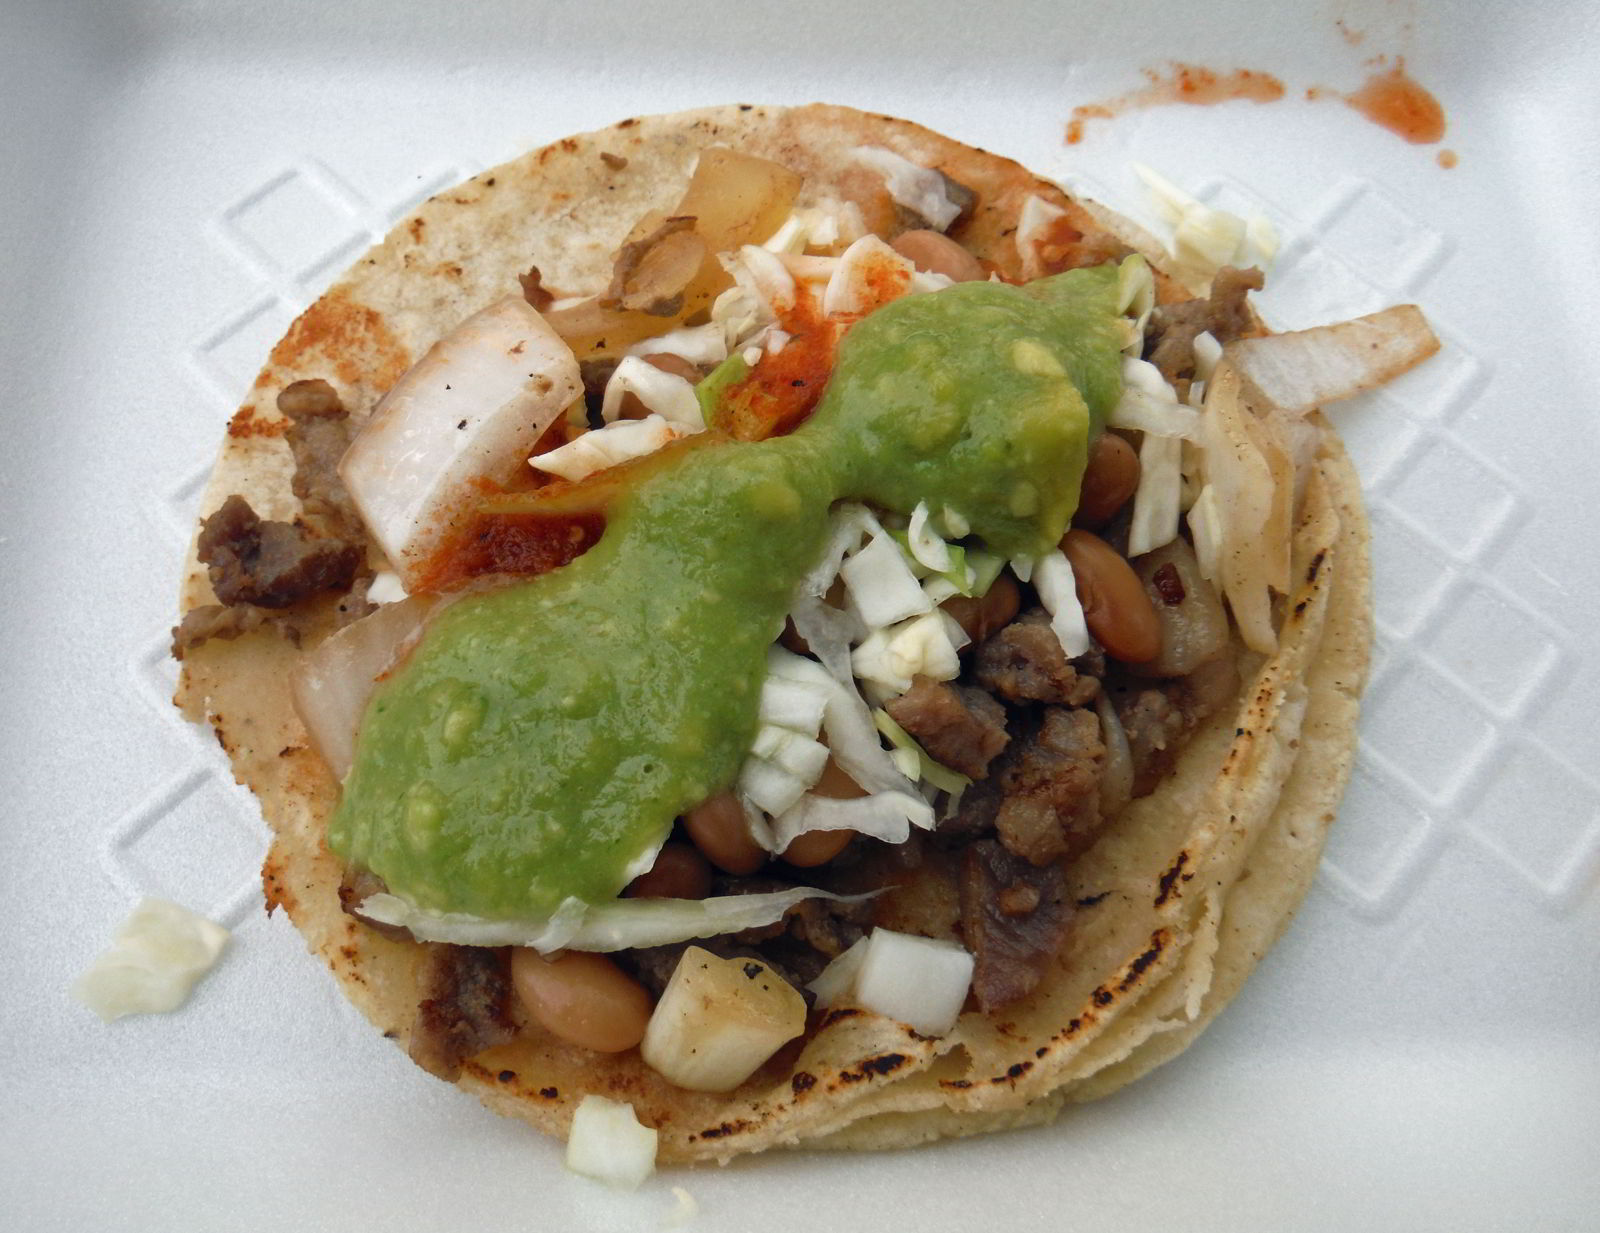 An image of a traditional taco from a taco stand called Taqueria El Cunado in Puerto Vallarta, Mexico - the best tacos in Puerto Vallarta